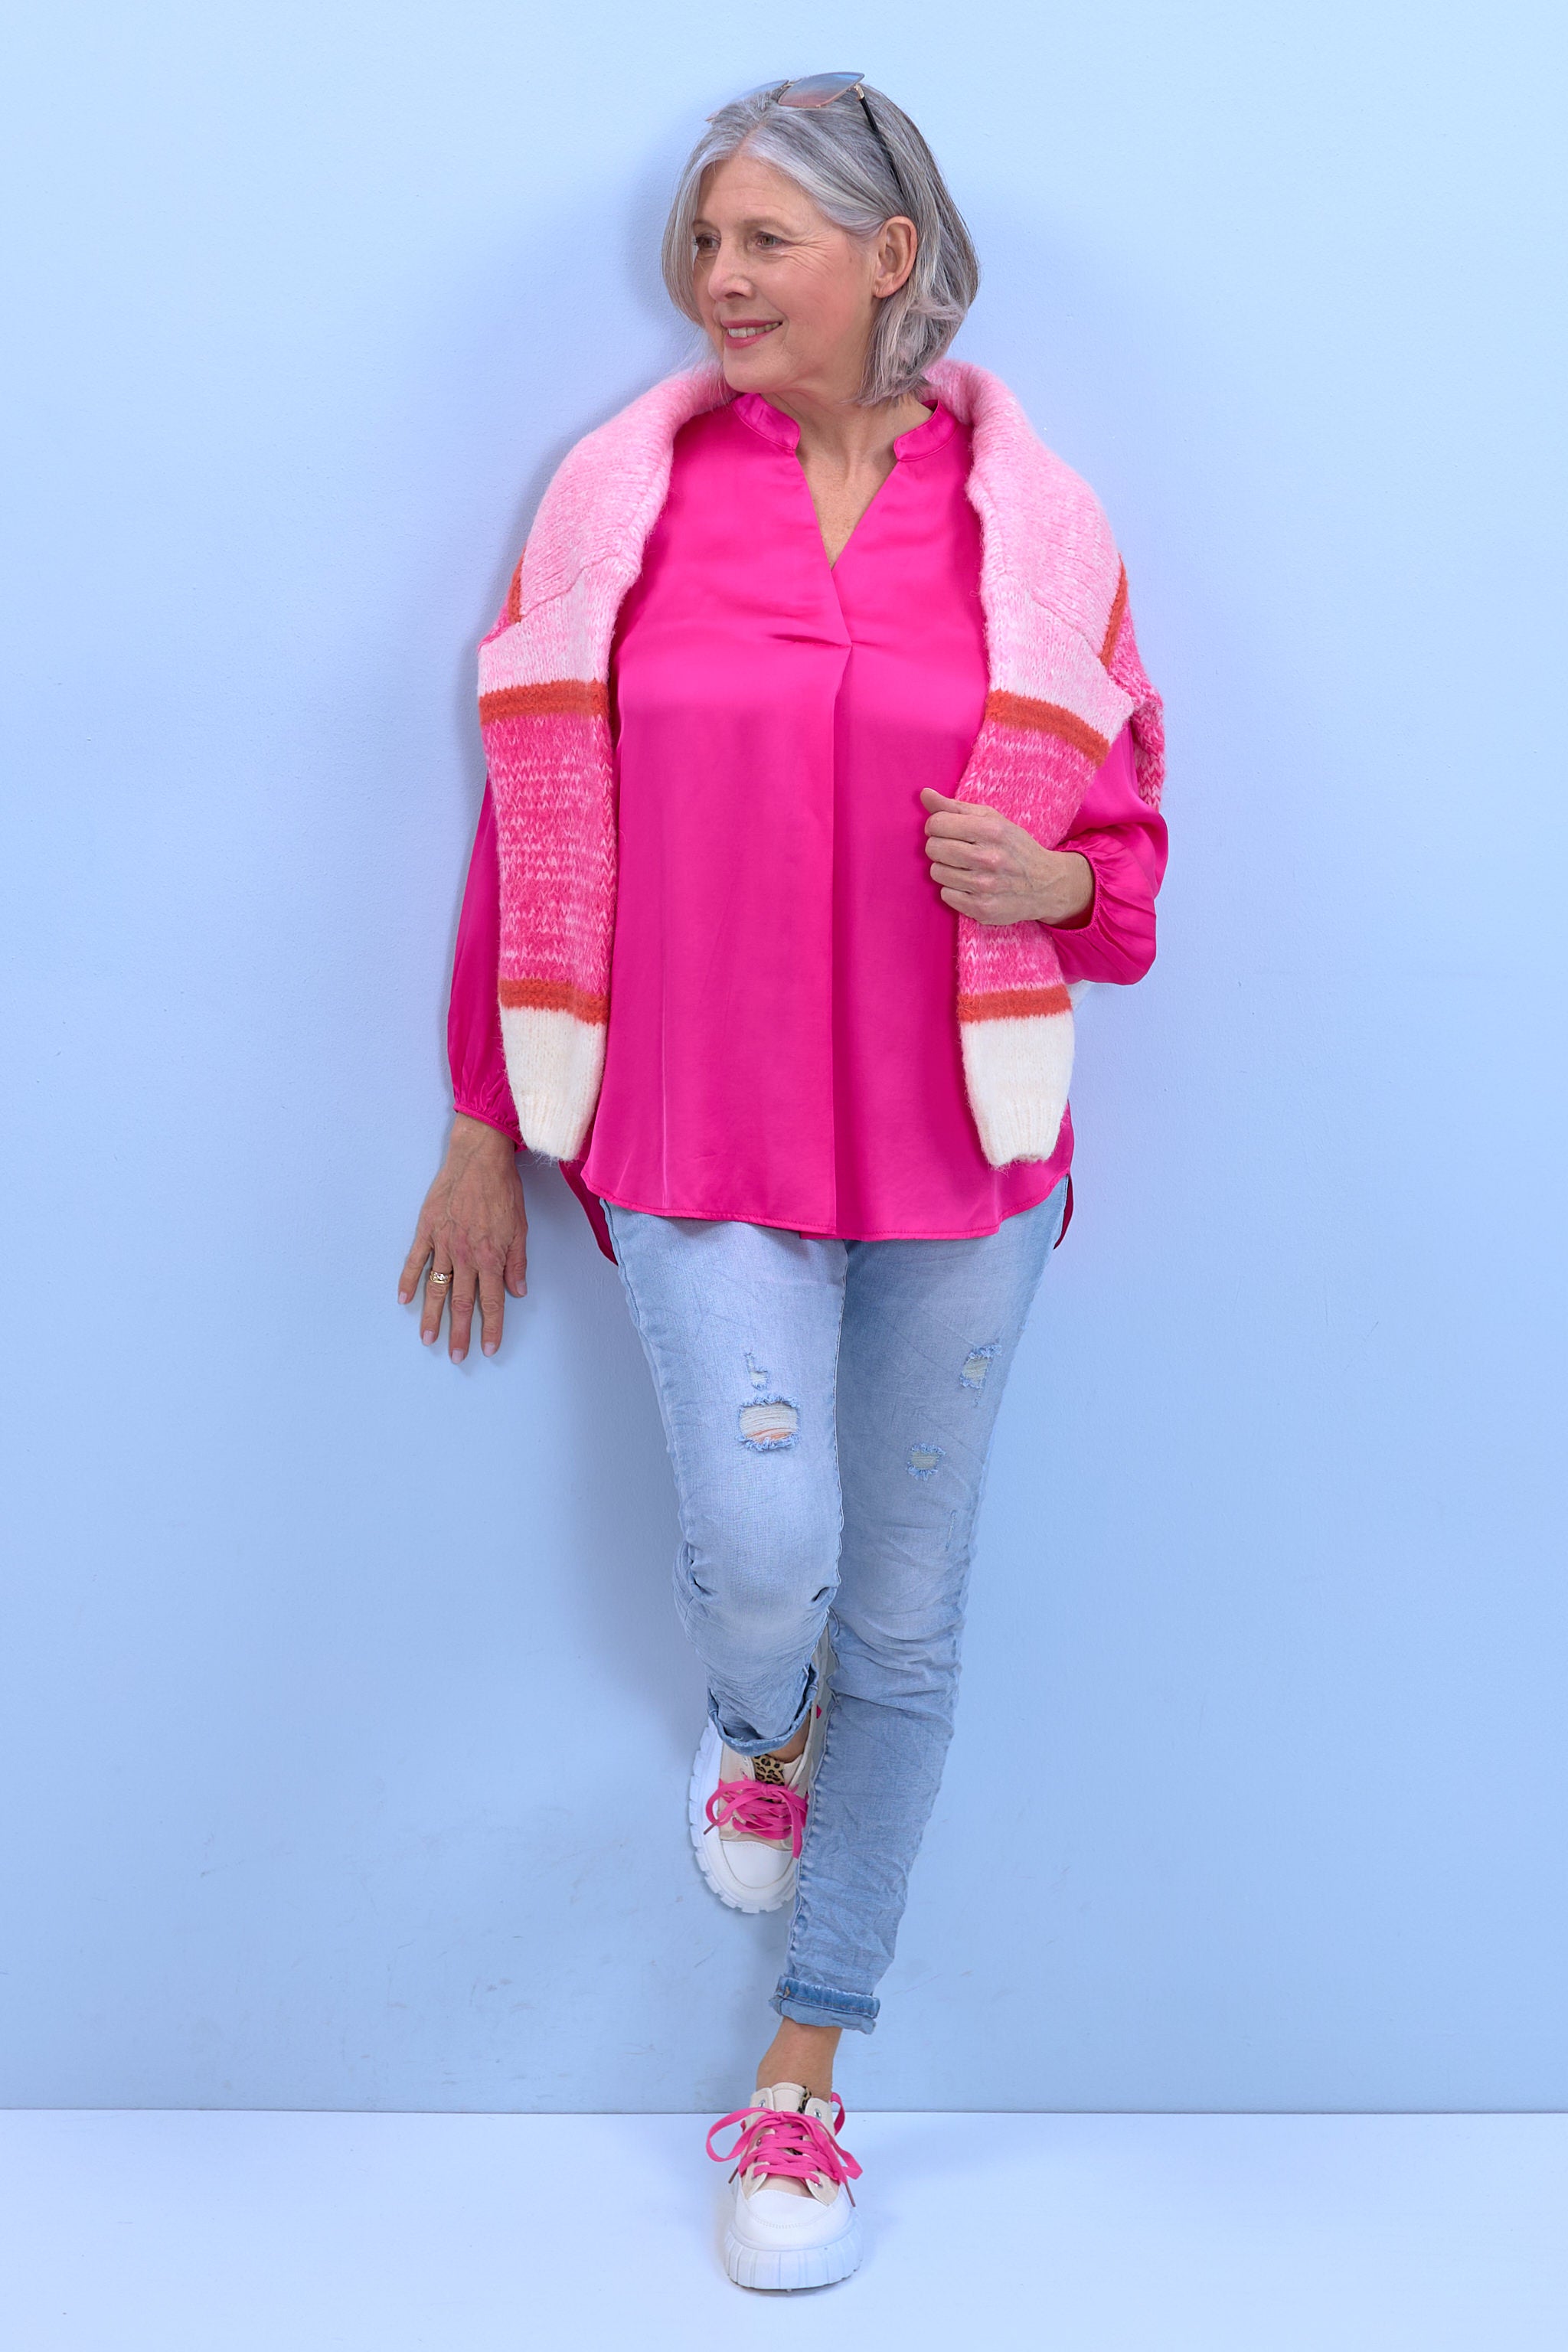 Blouse made of shiny fabric with V-neck, pink